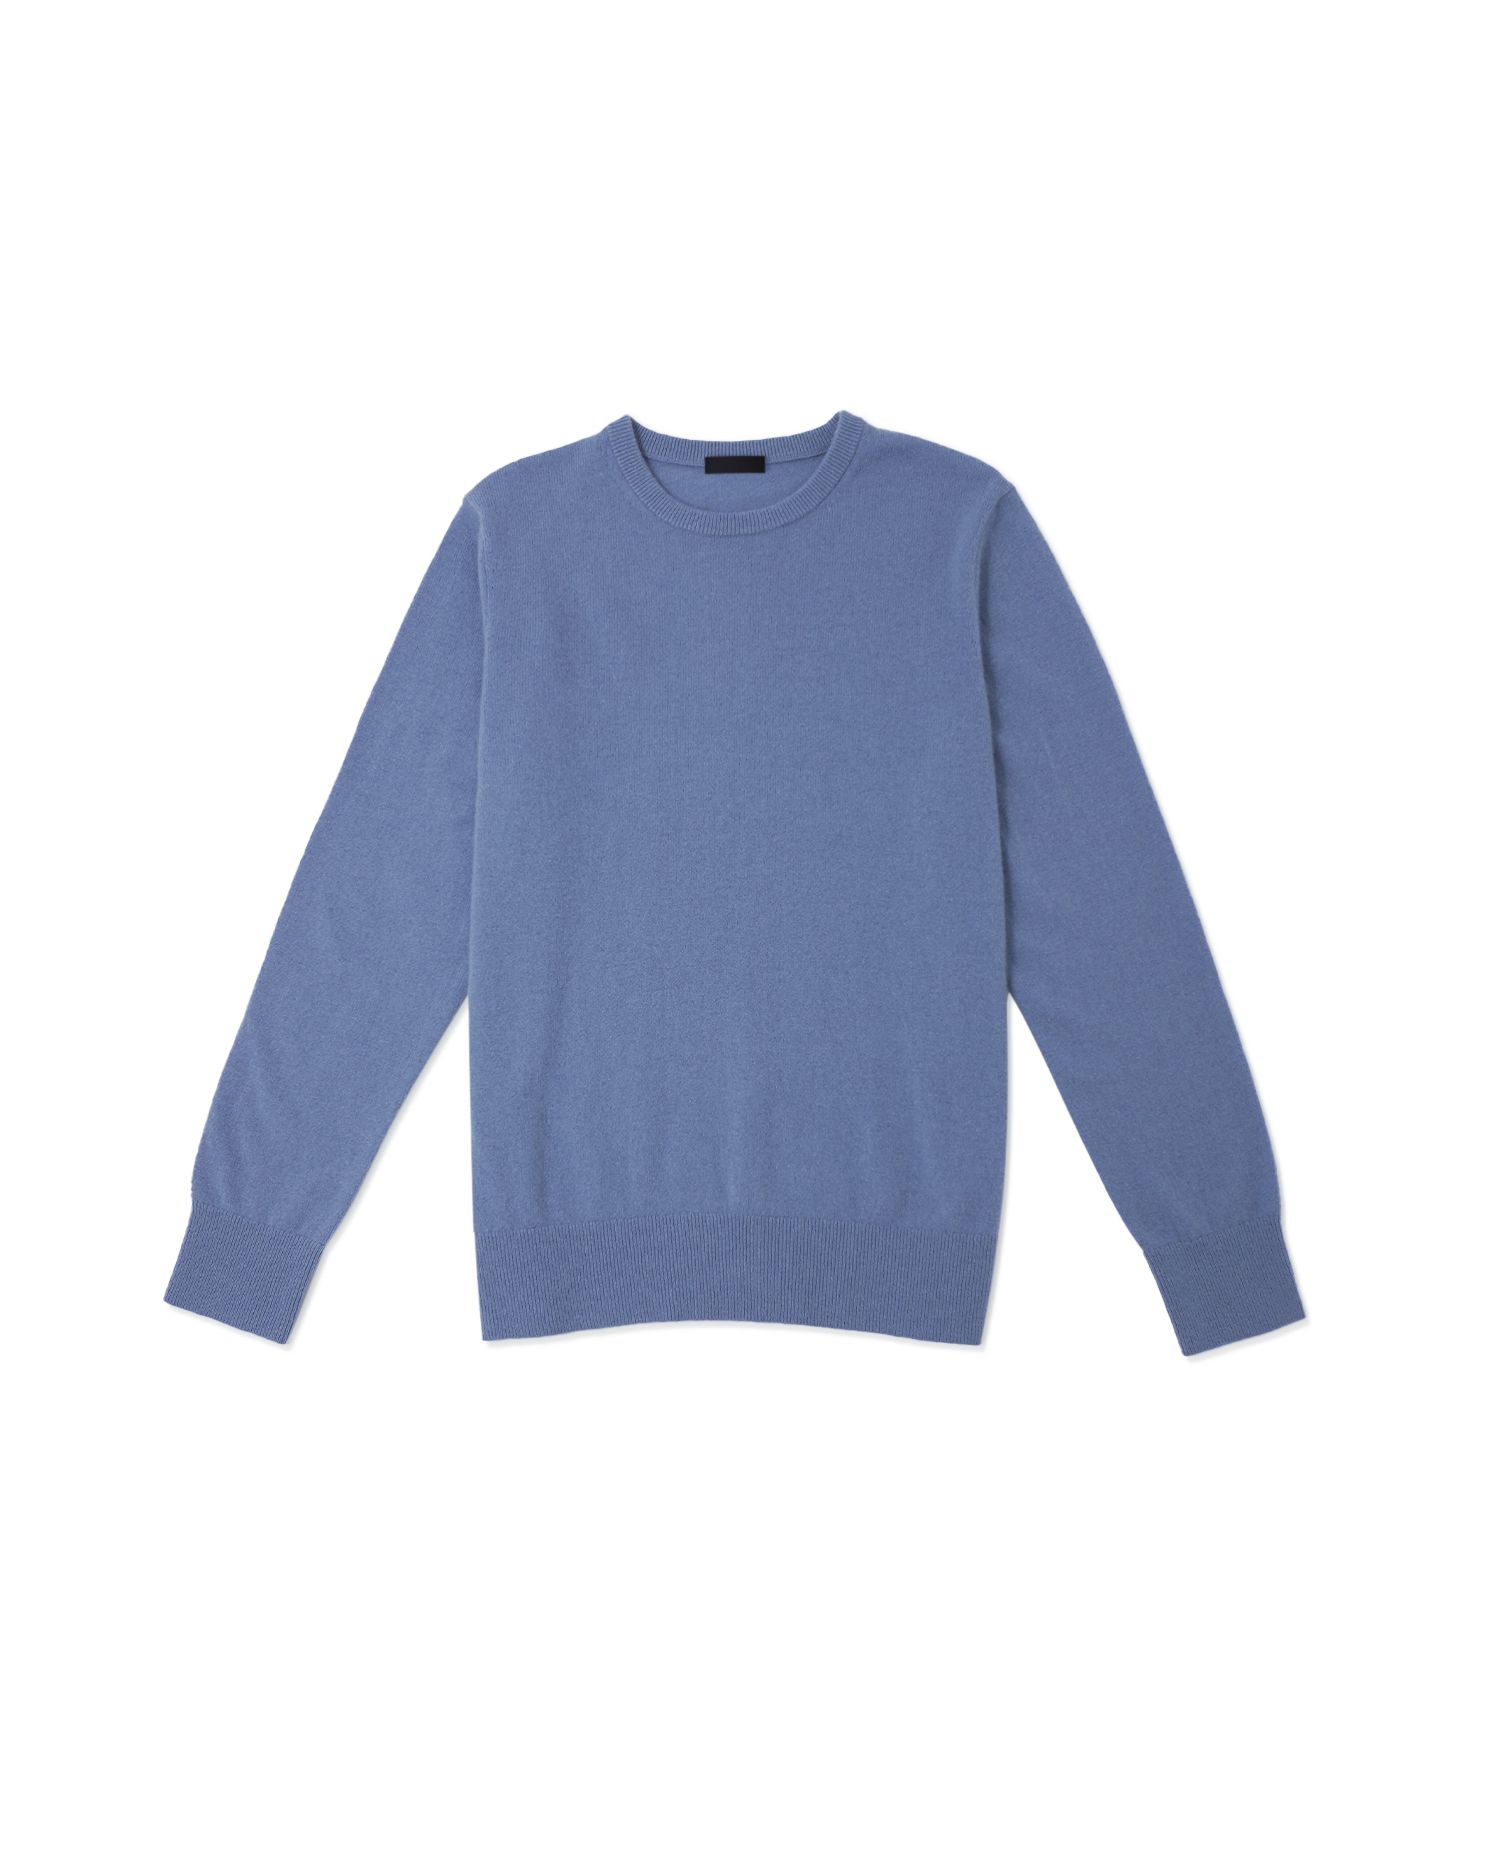 Quince cashmere sweater